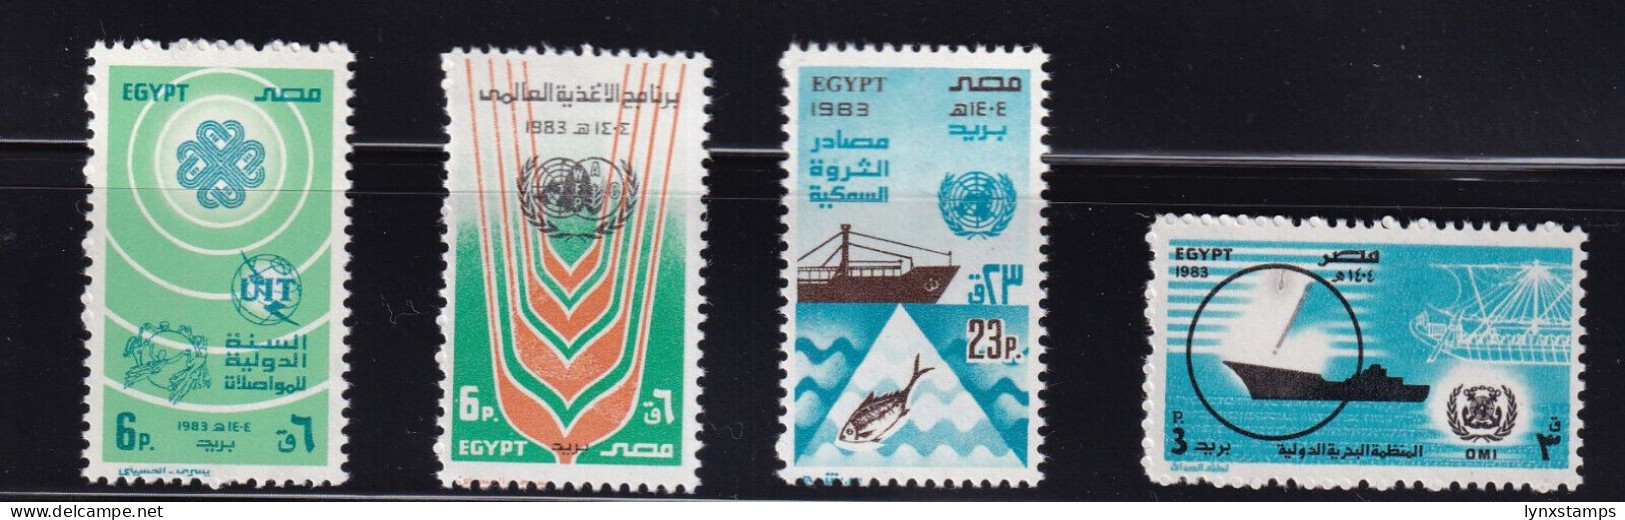 LI06 Egypt 1983 United Nations Day Mint Stamps Full Set - Unused Stamps